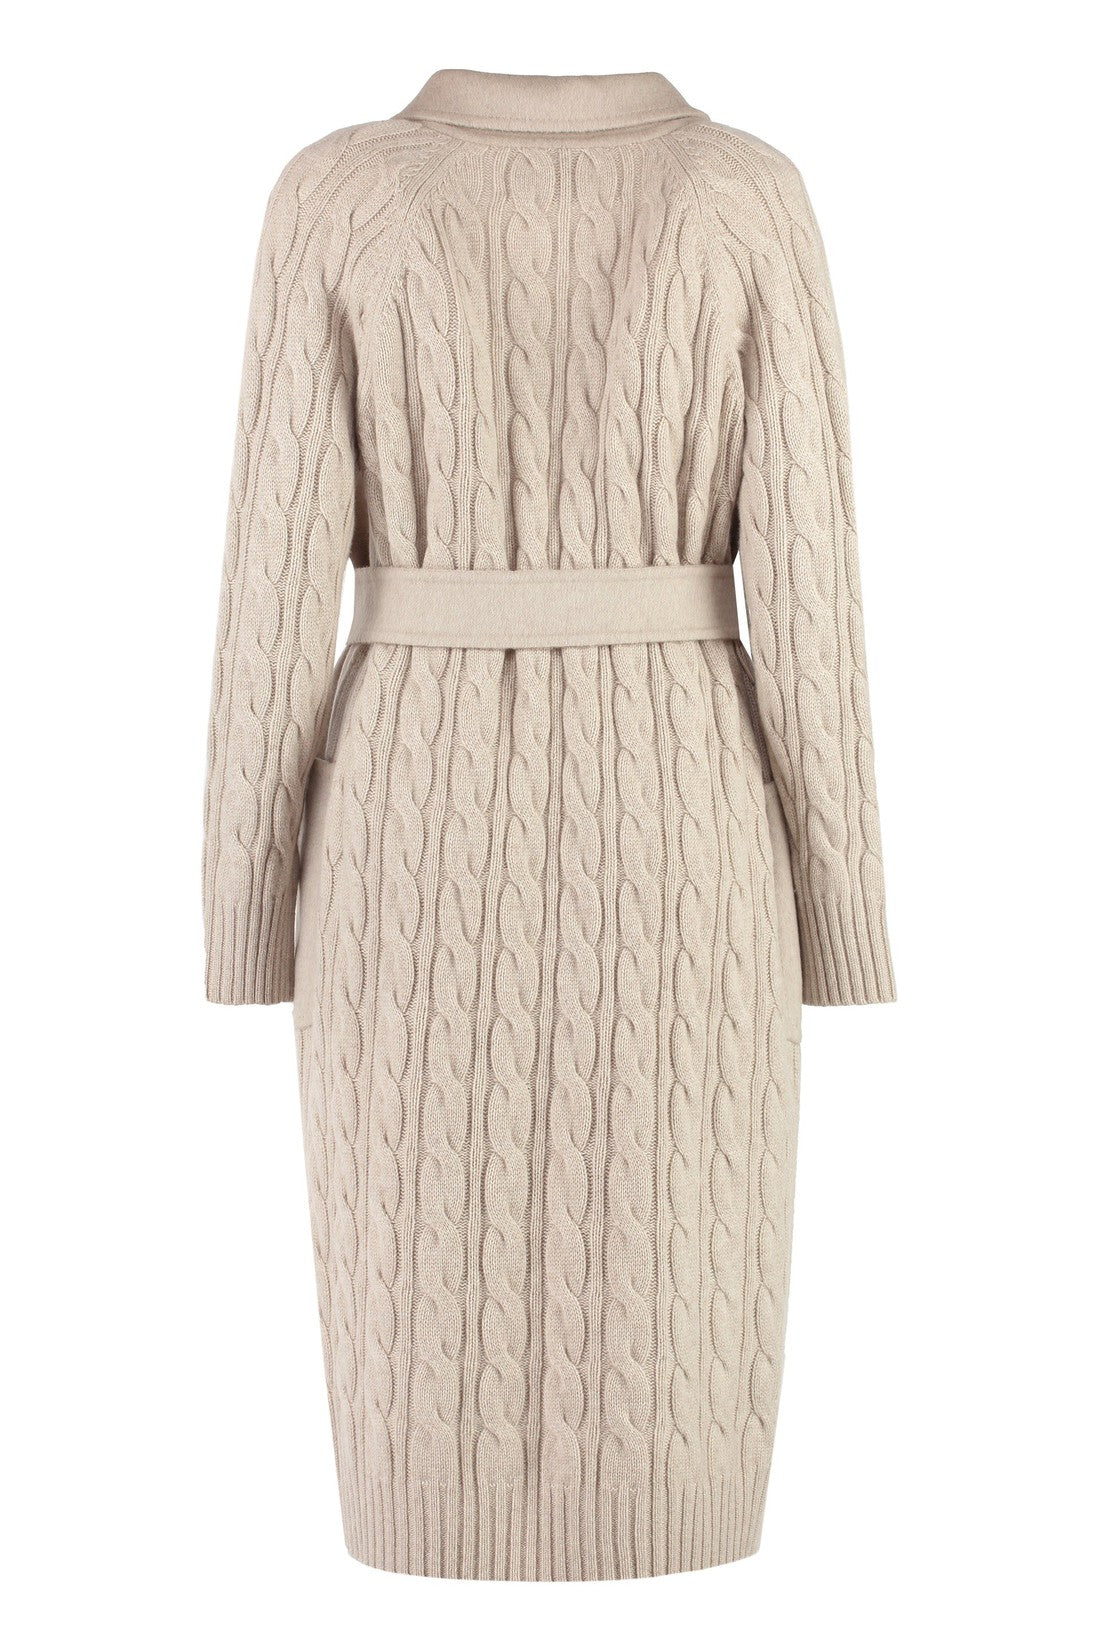 Max Mara-OUTLET-SALE-Hello wool and cashmere coat-ARCHIVIST